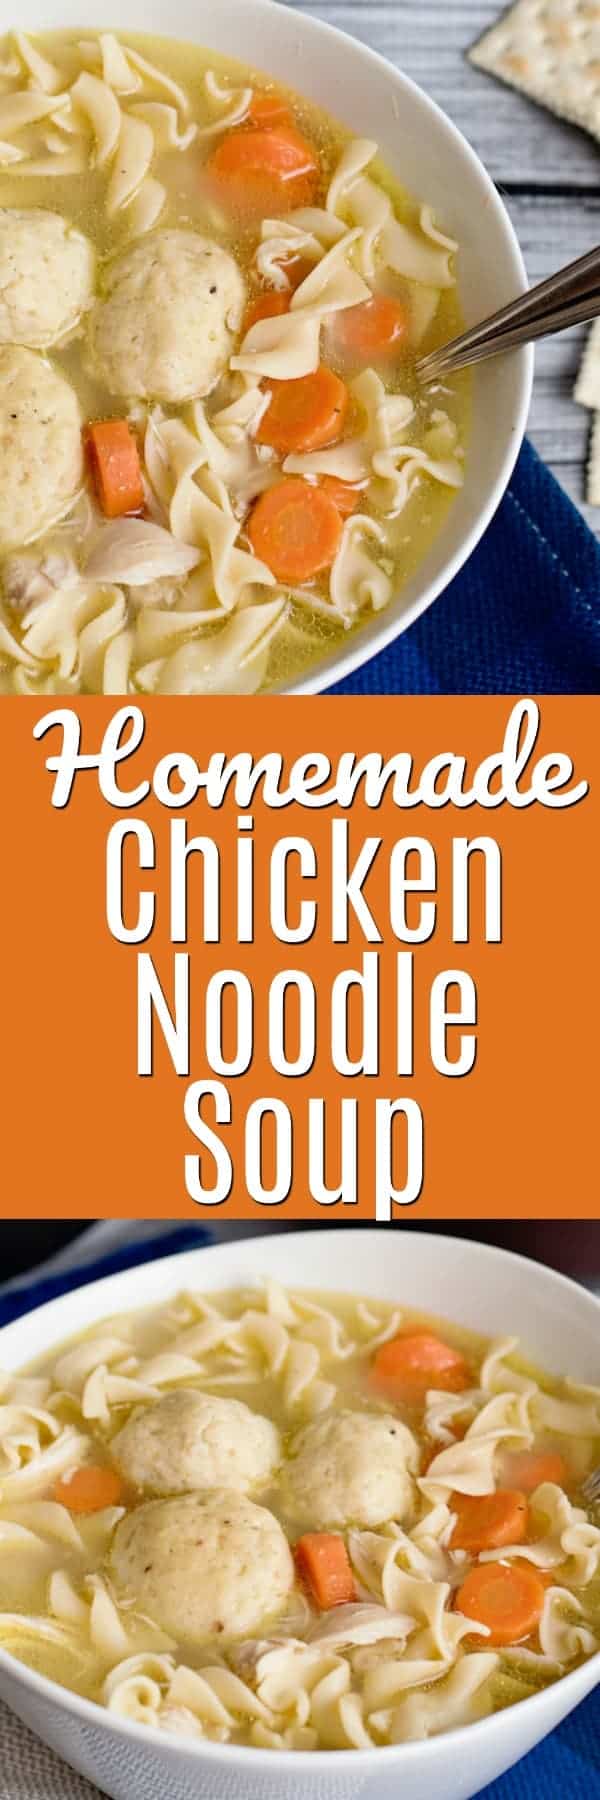 A Pinterest image for homemade chicken noodle soup